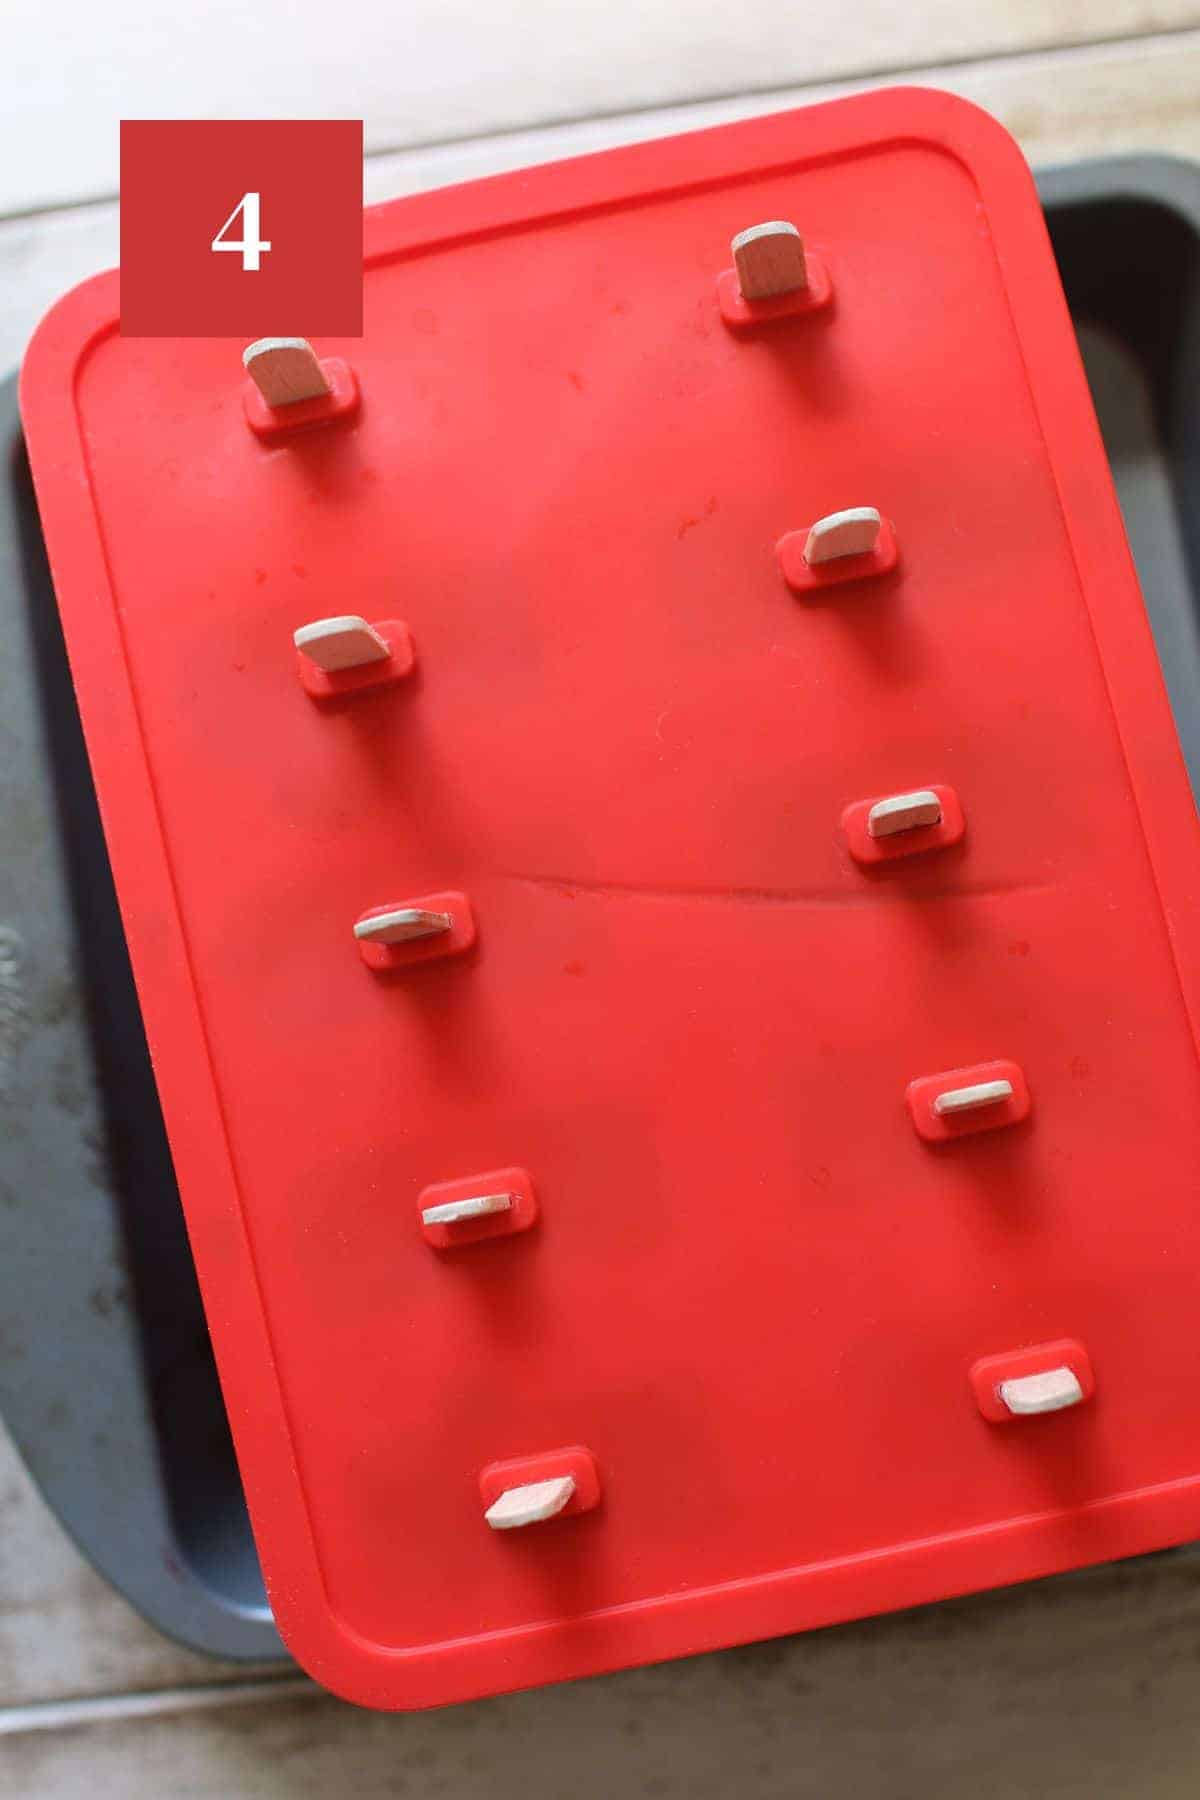 A red popsicle mold in a 8x8 square metal baking pan on a wood plank background. In the upper left corner is a dark red square with a white '4' in the center.